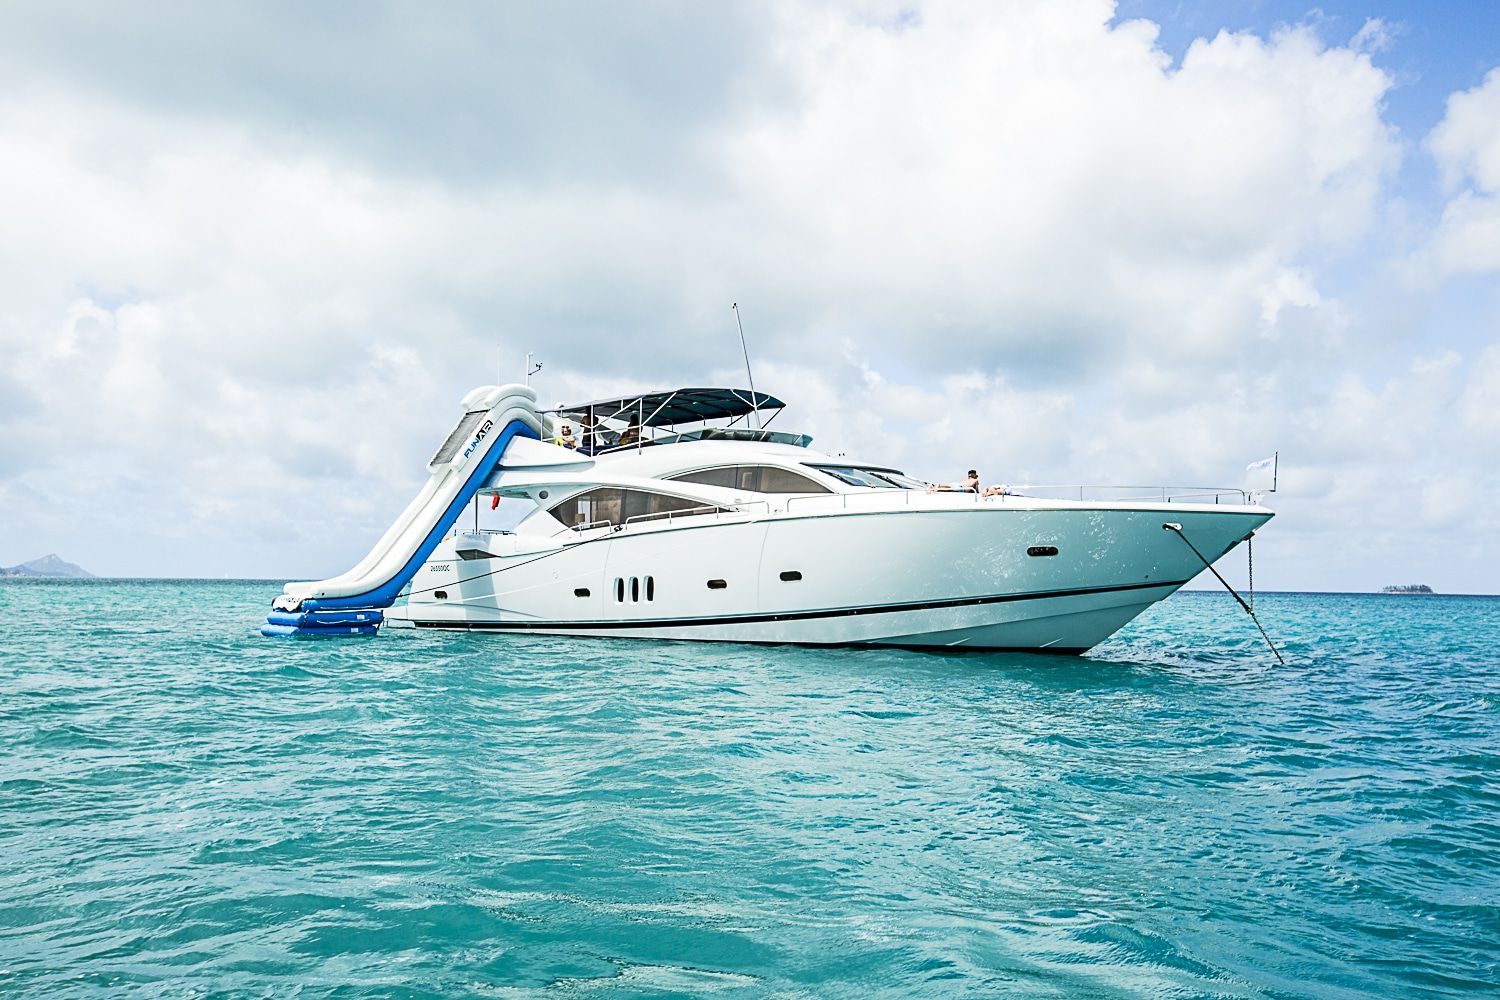 M.Y ALANI | From $1,800 Per Hour | 35 Guests